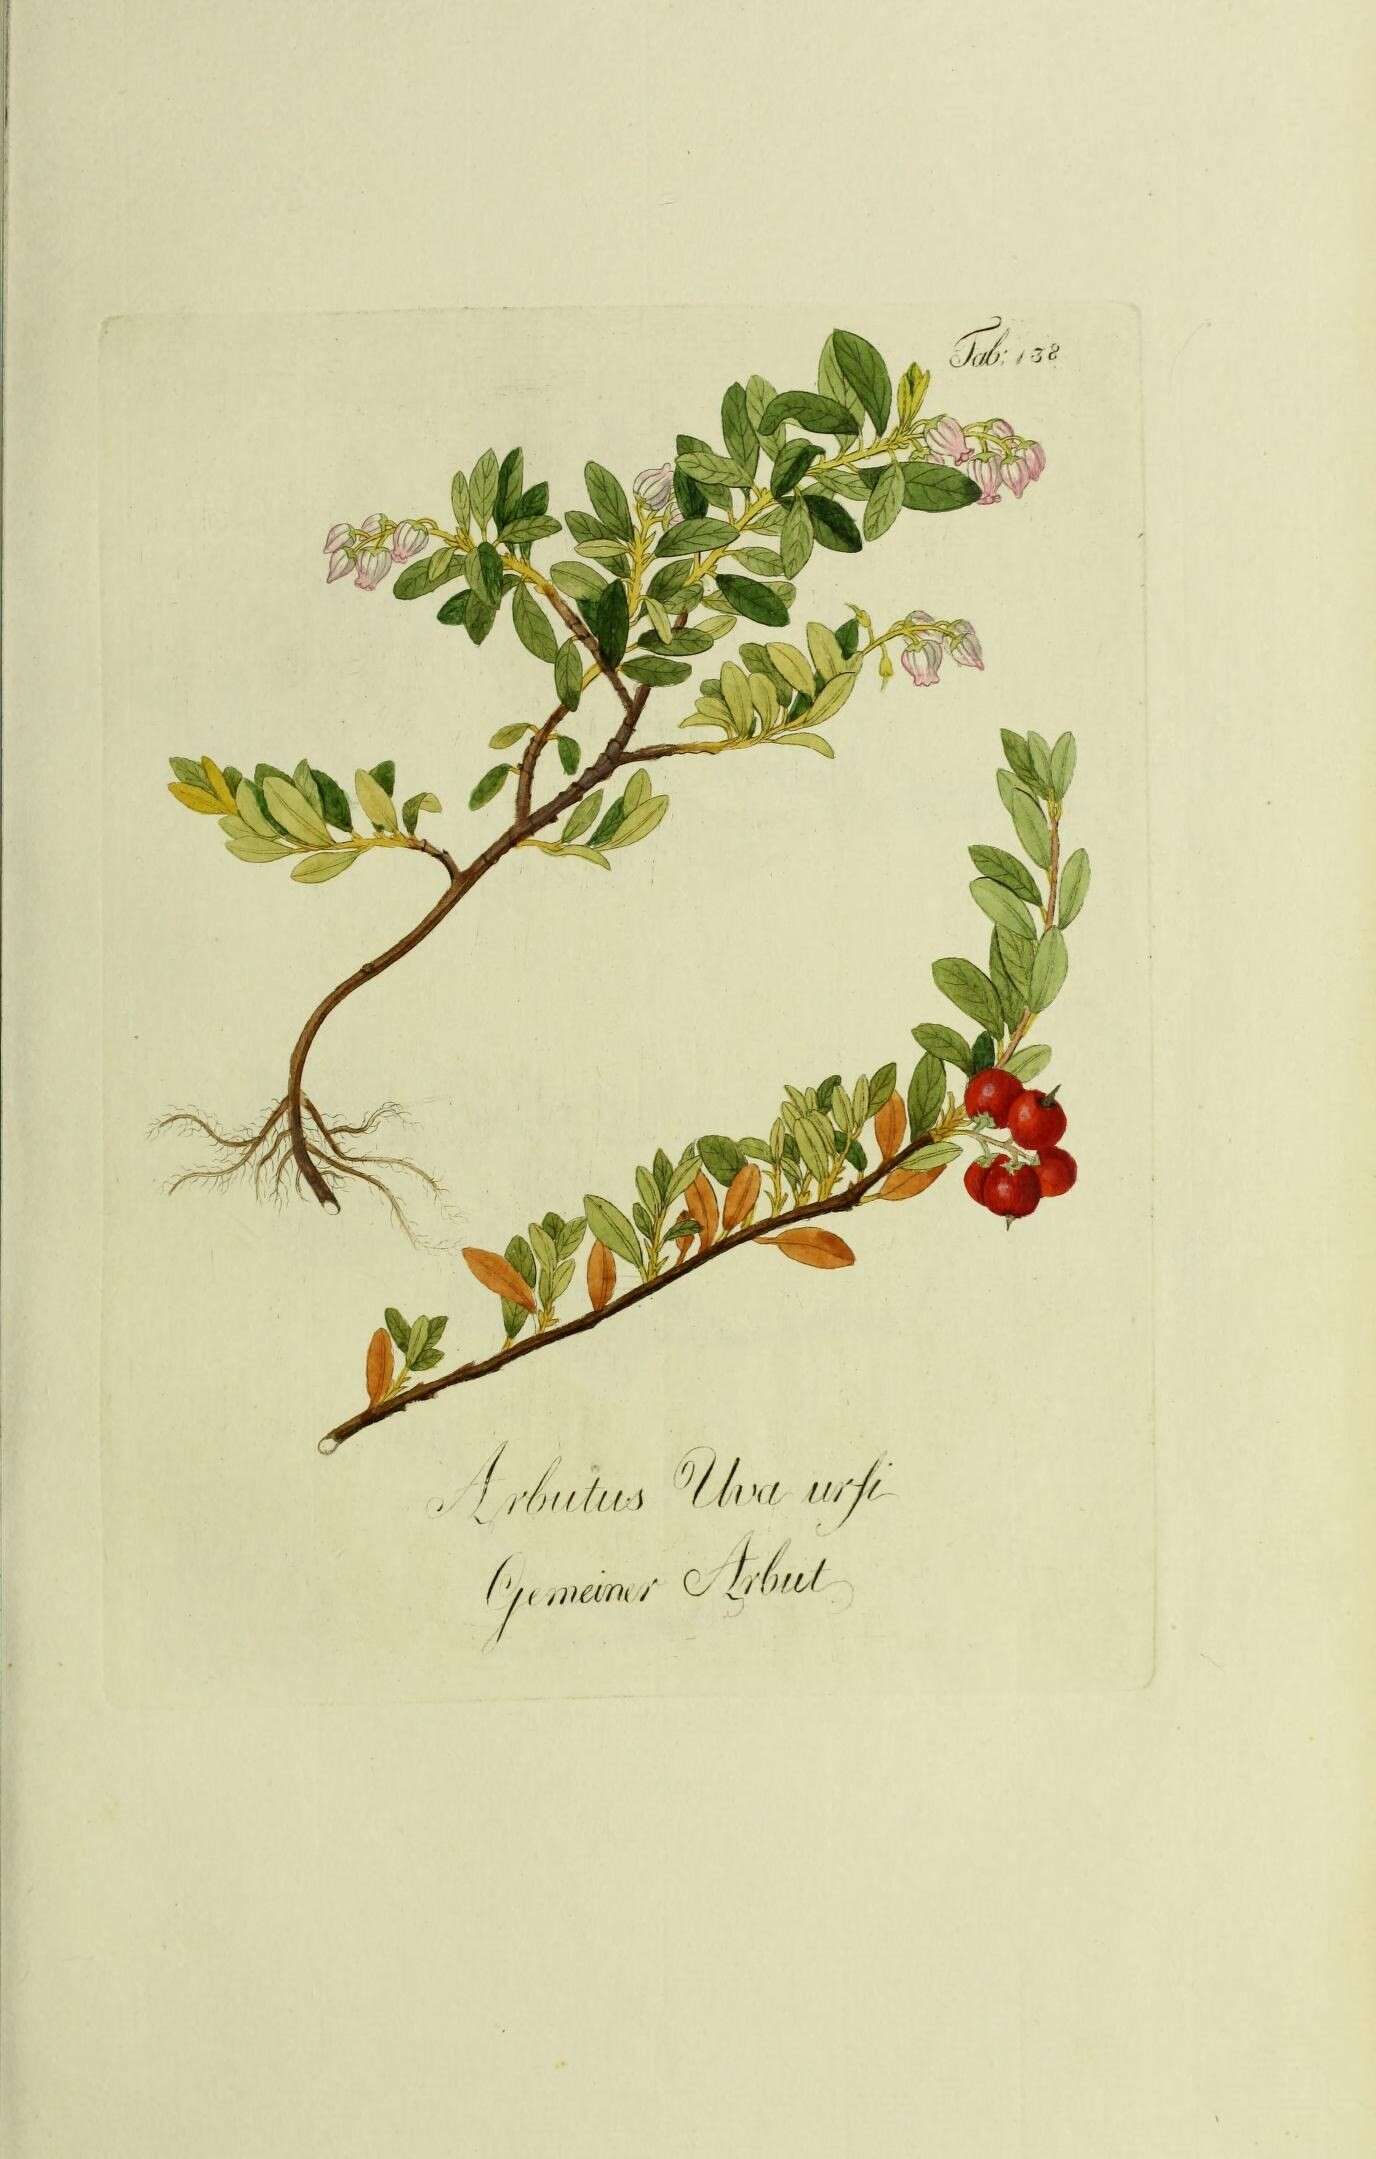 Image of bearberry